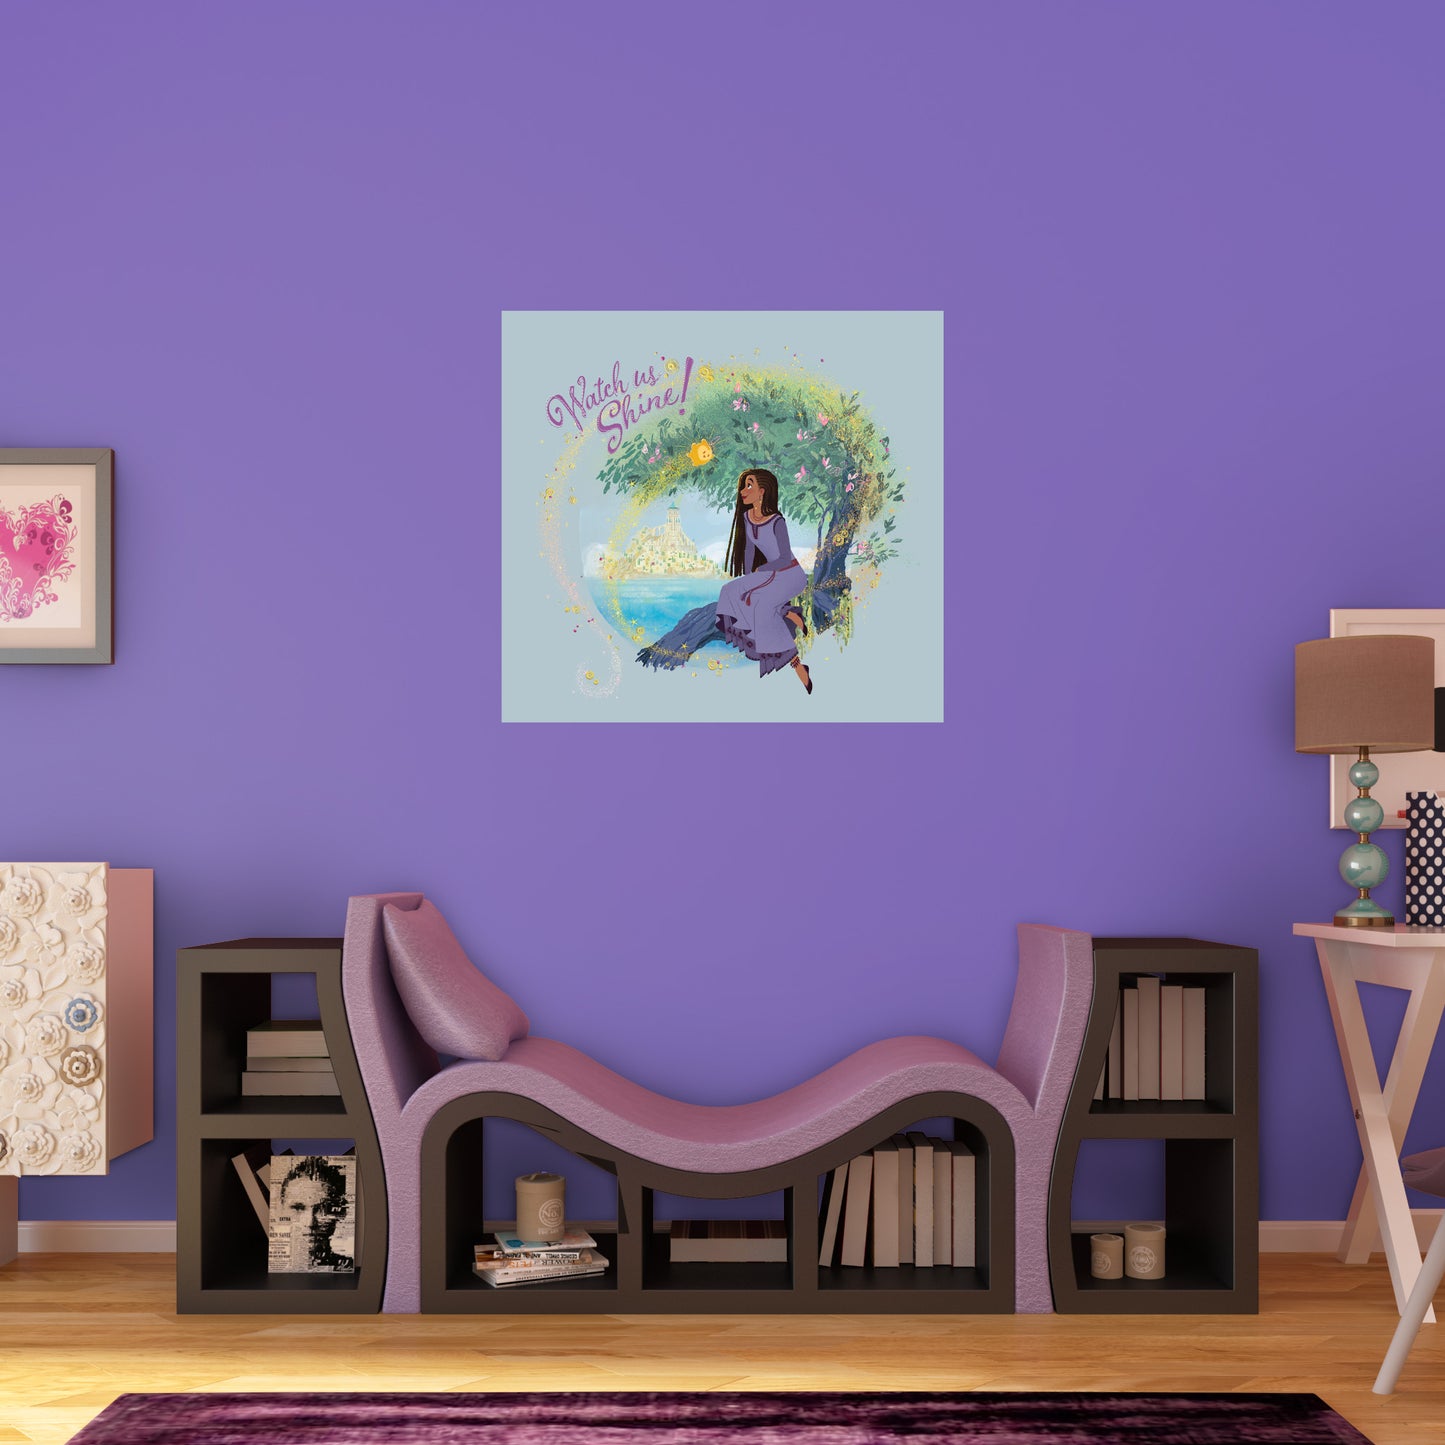 Wish: Asha Watch us Shine Poster        - Officially Licensed Disney Removable     Adhesive Decal